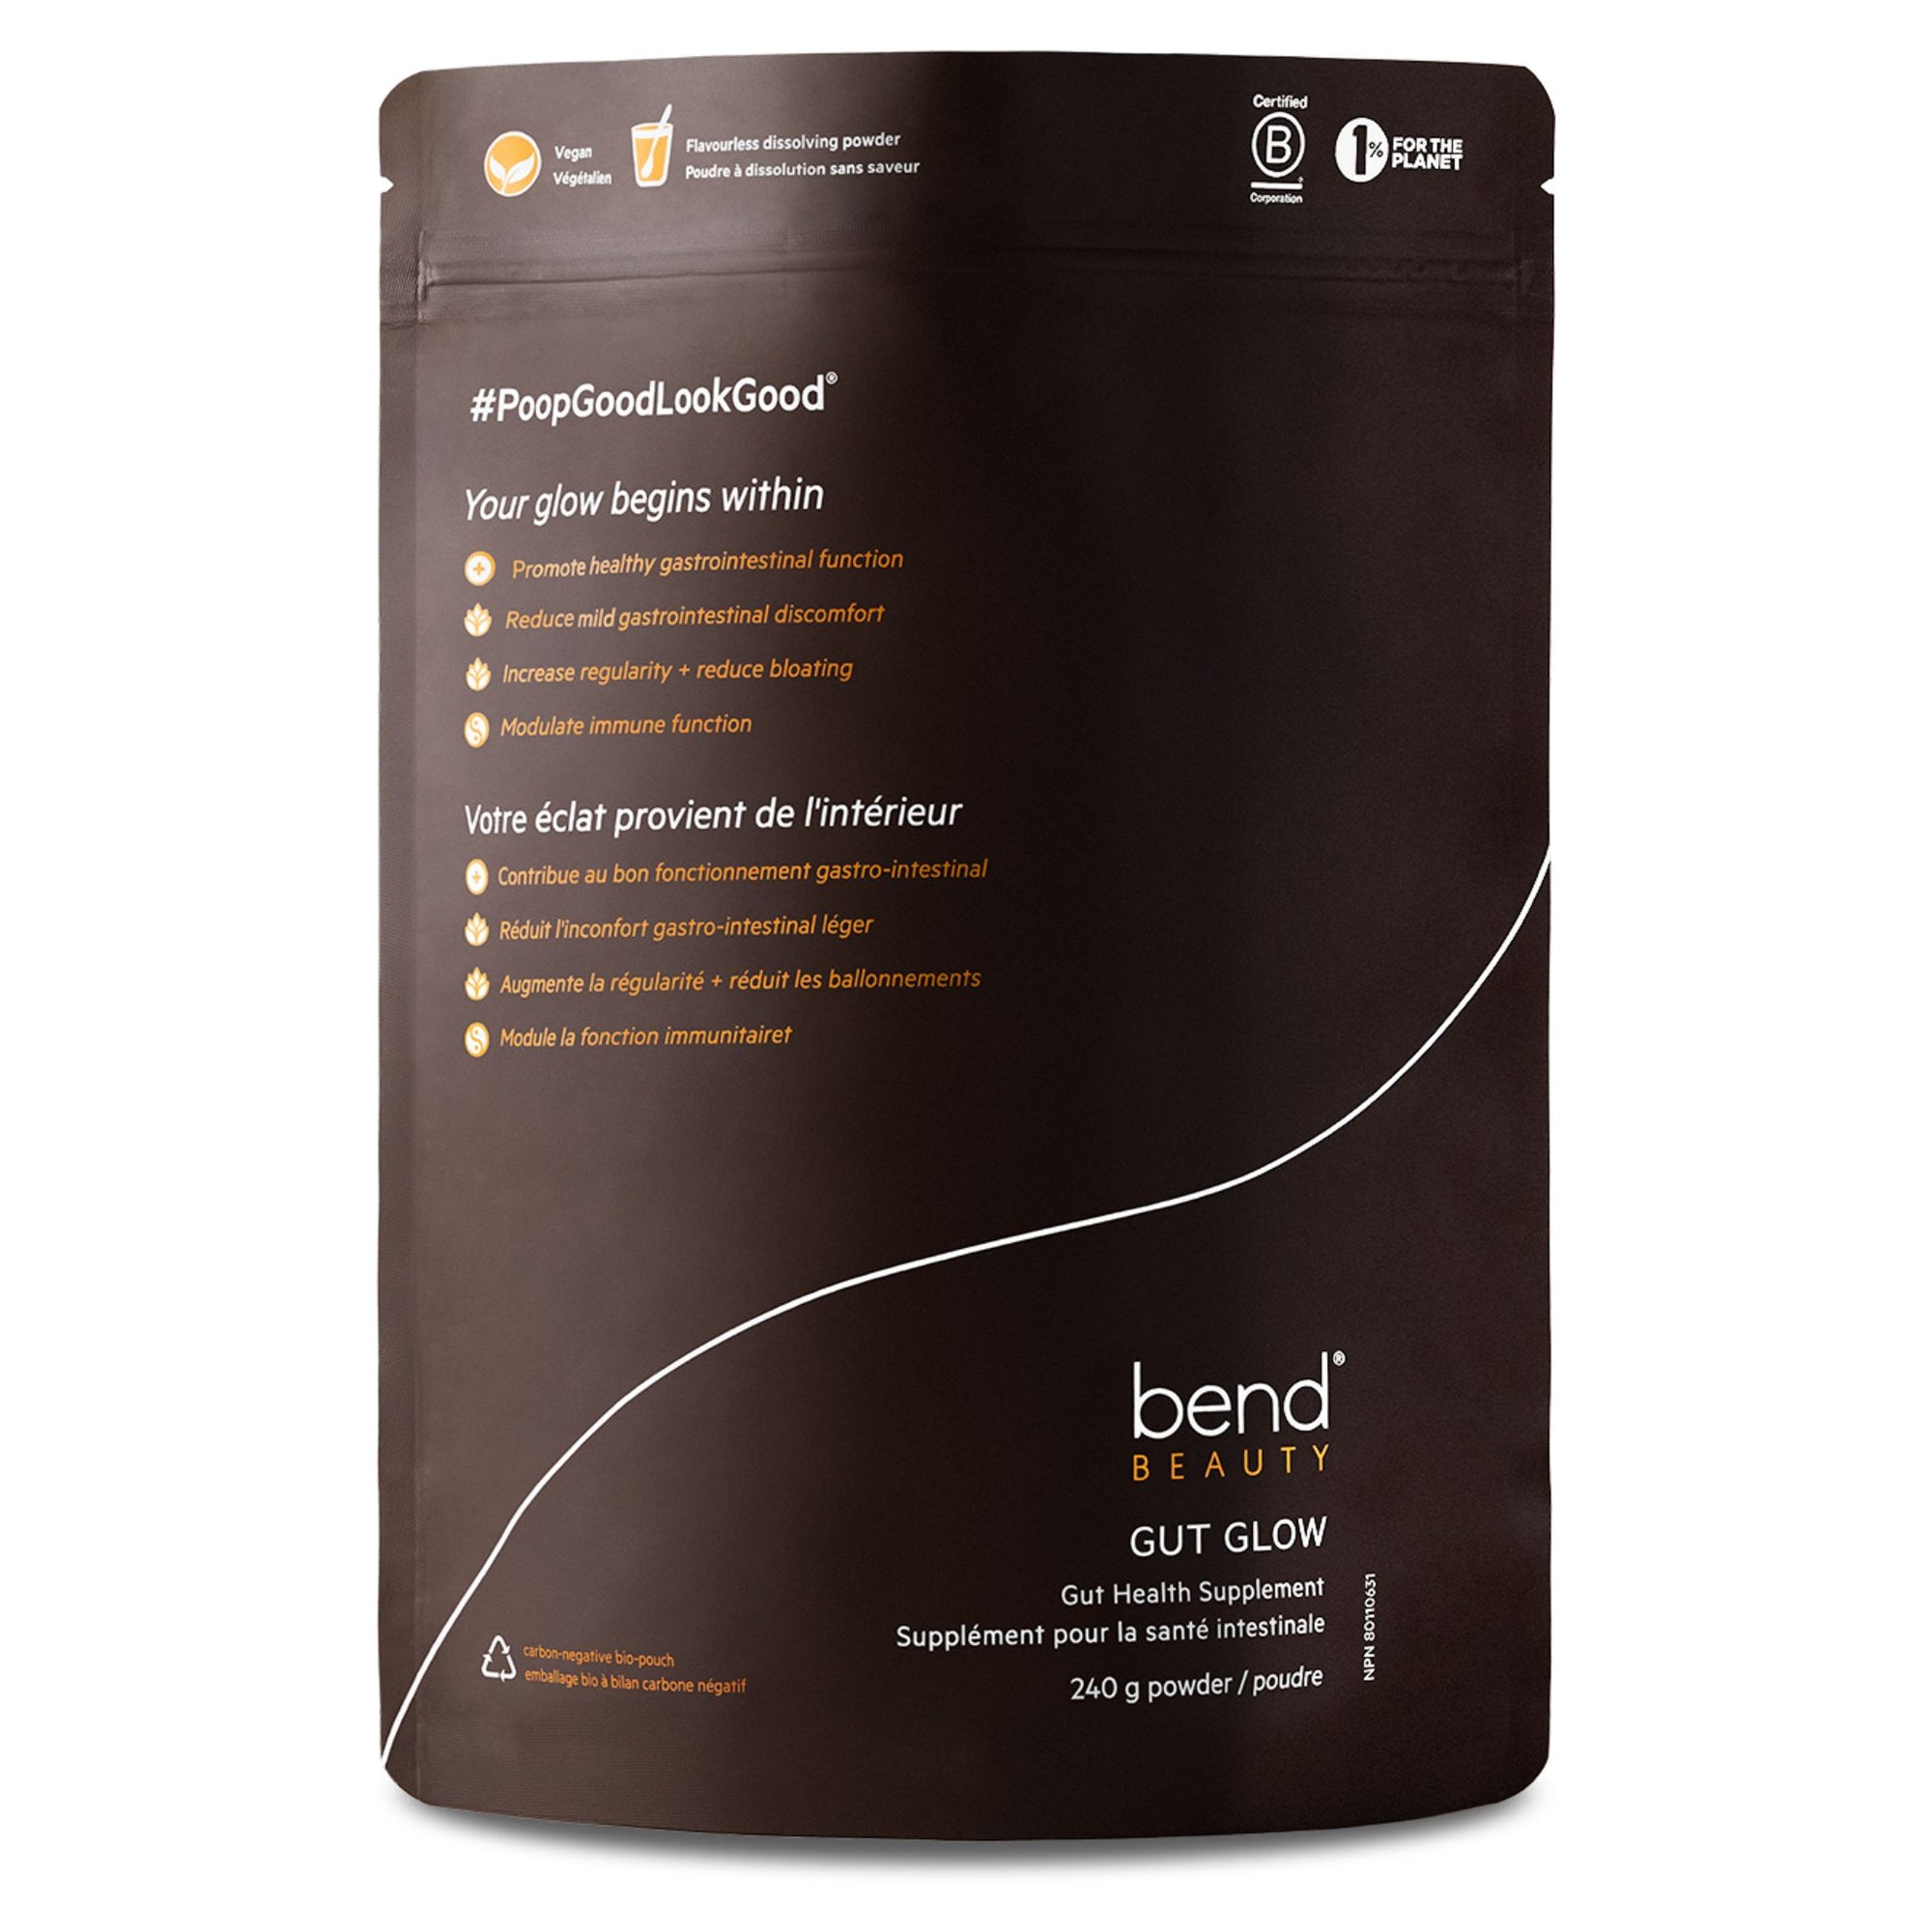 Image of Bend Beauty Gut Glow 240g powder - front of bag - a fiber-rich supplement for gut health, available at Fiddleheads Health and Nutrition.